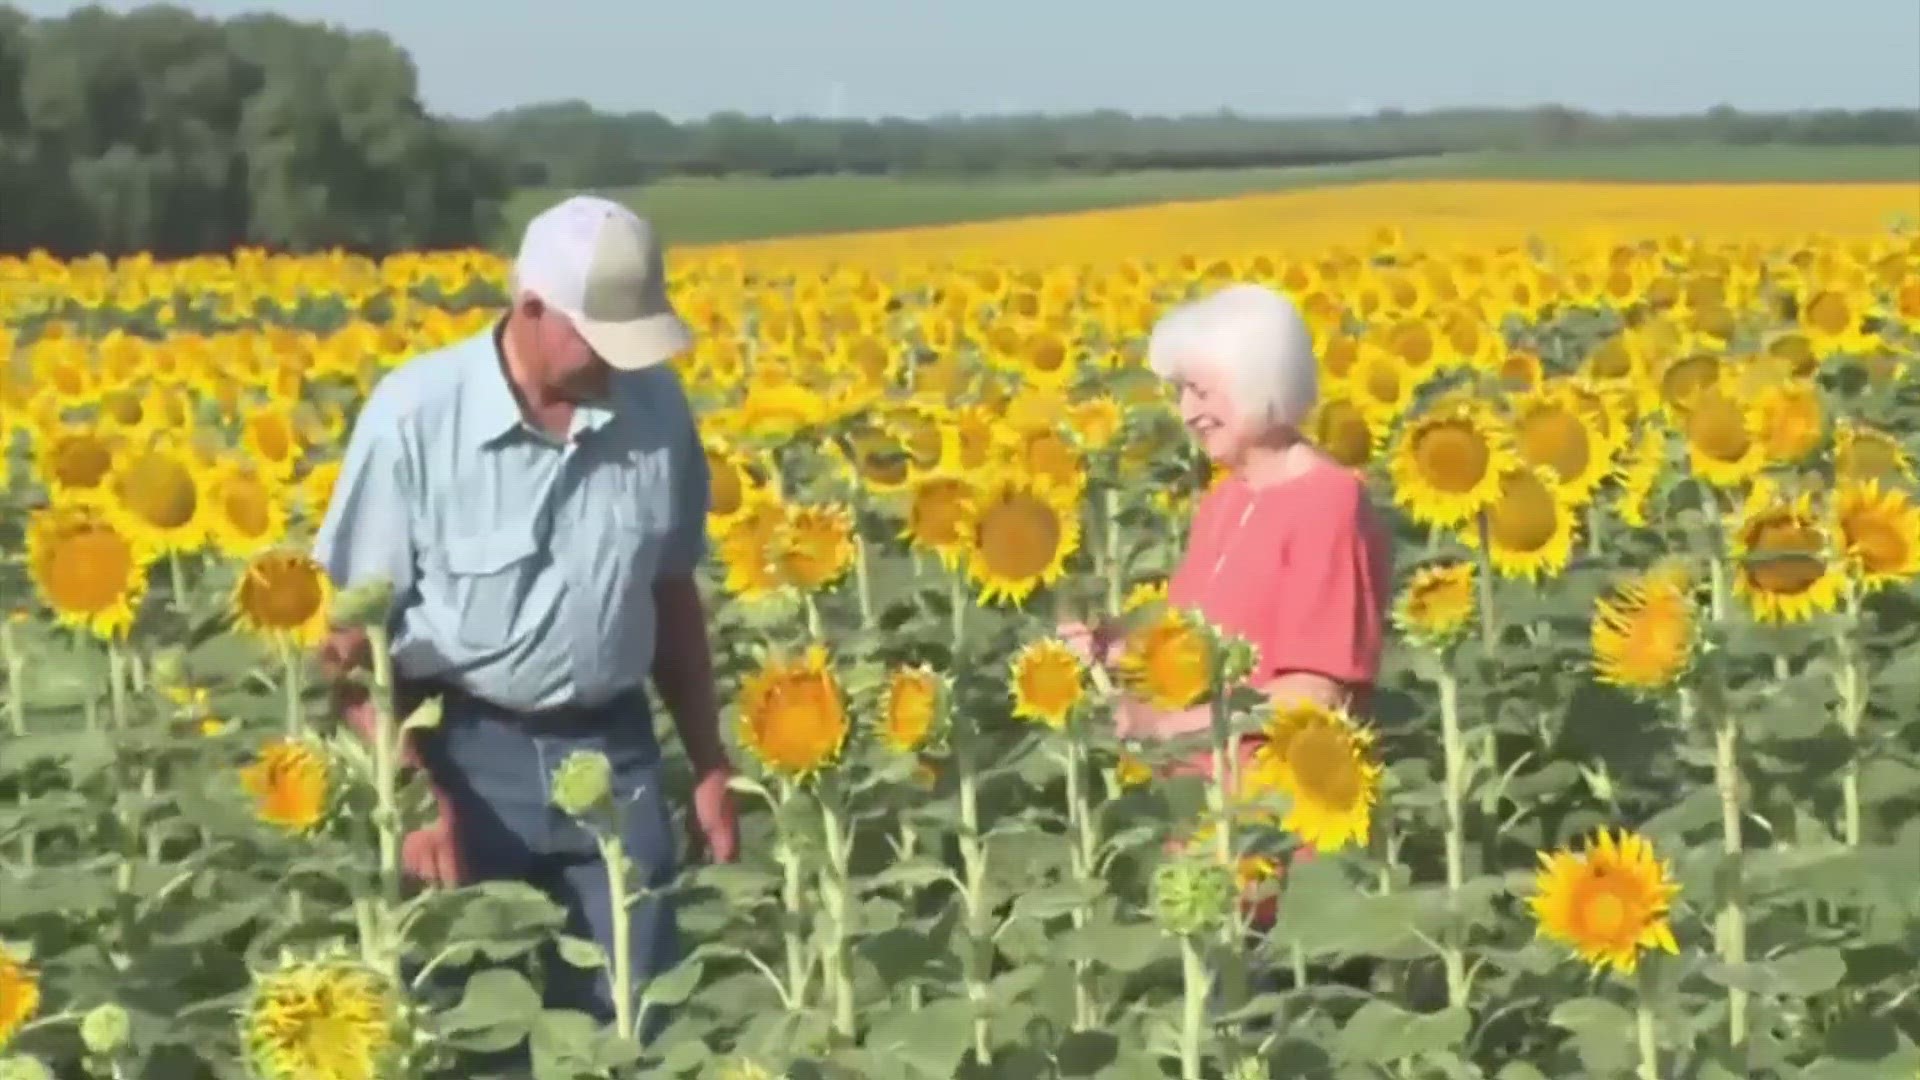 Lee Wilson set a new bar in the romance department when he surprised his wife and high school sweetheart Renee with over a million sunflowers. Happy anniversary!